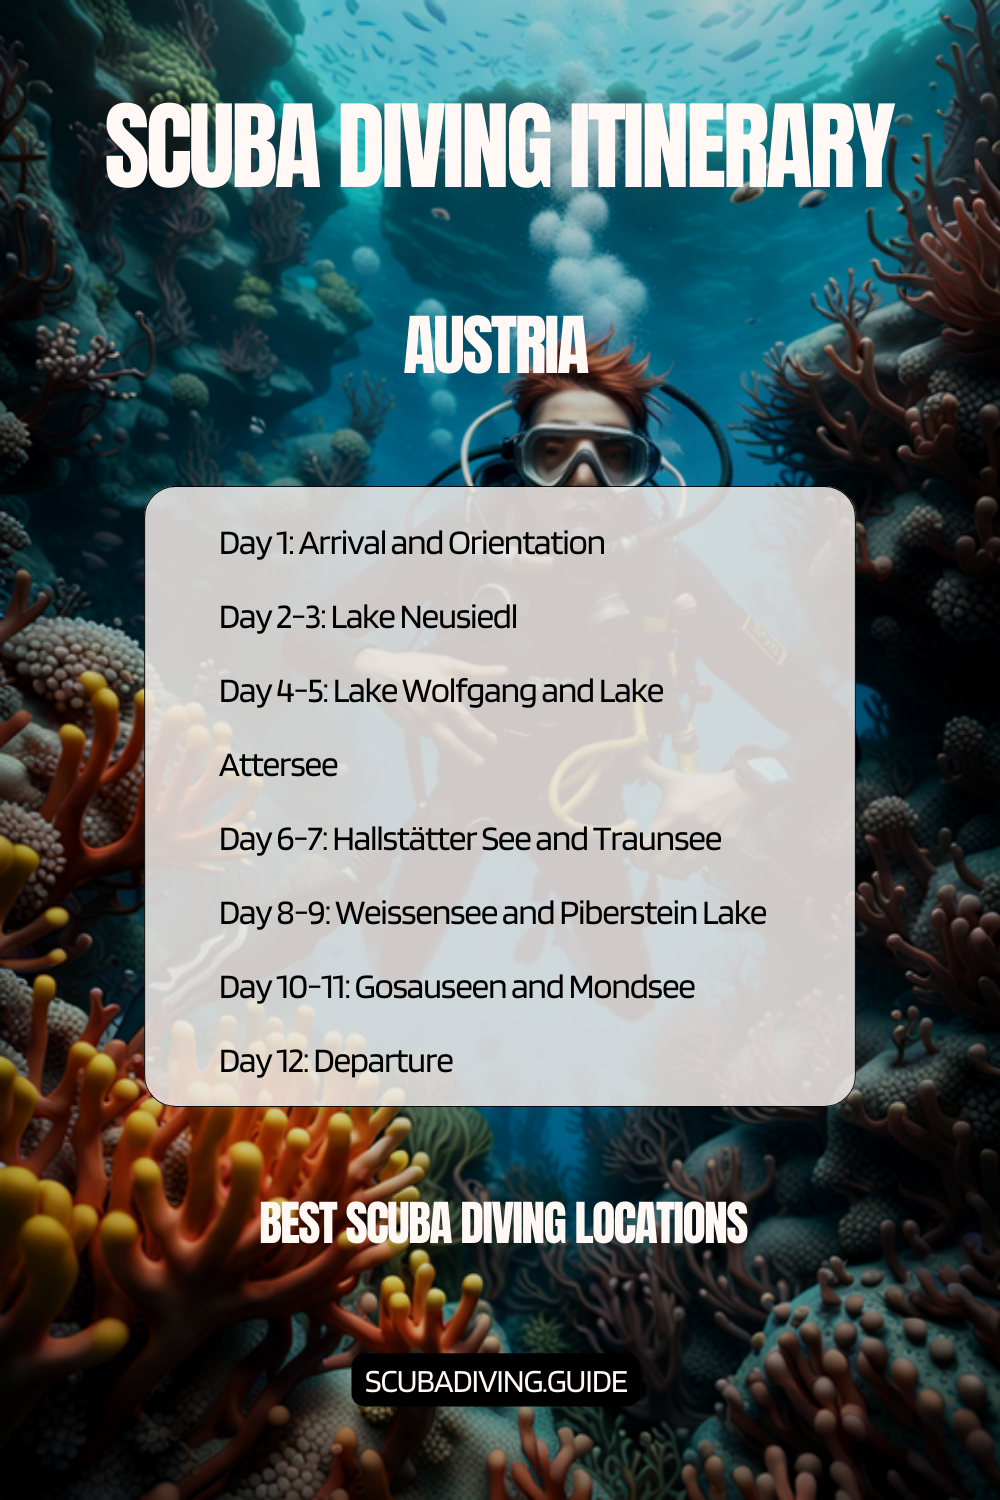 Austria Recommended Scuba Diving Itinerary